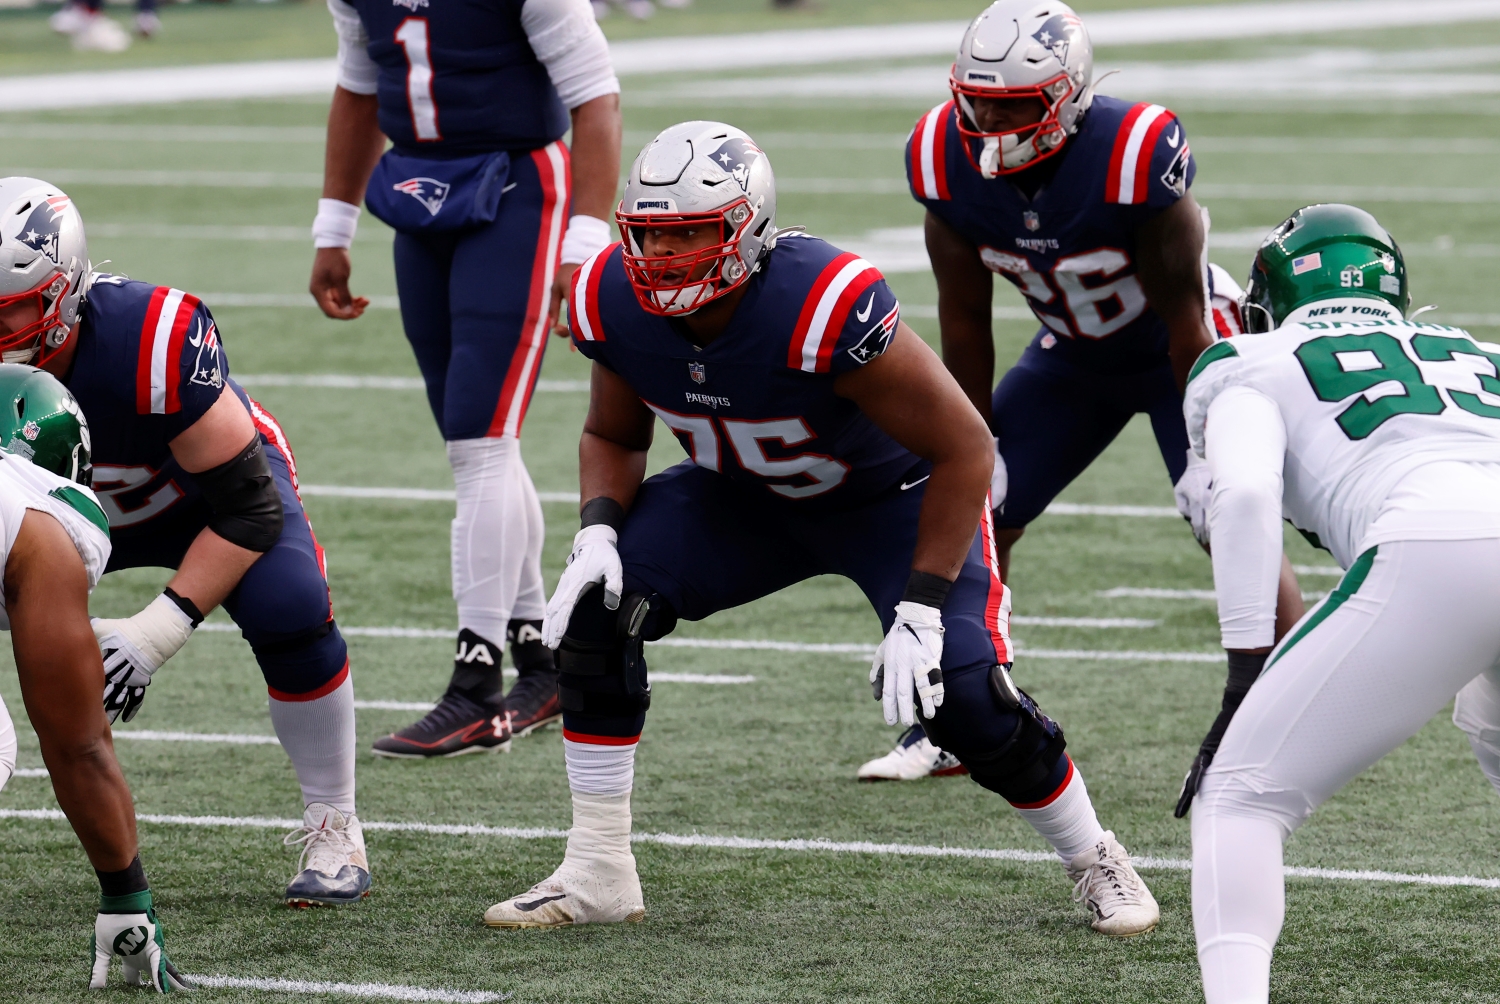 New England Patriots offensive tackle Justin Herron waits for the snap during a game against the New York Jets on Jan. 3, 2021.